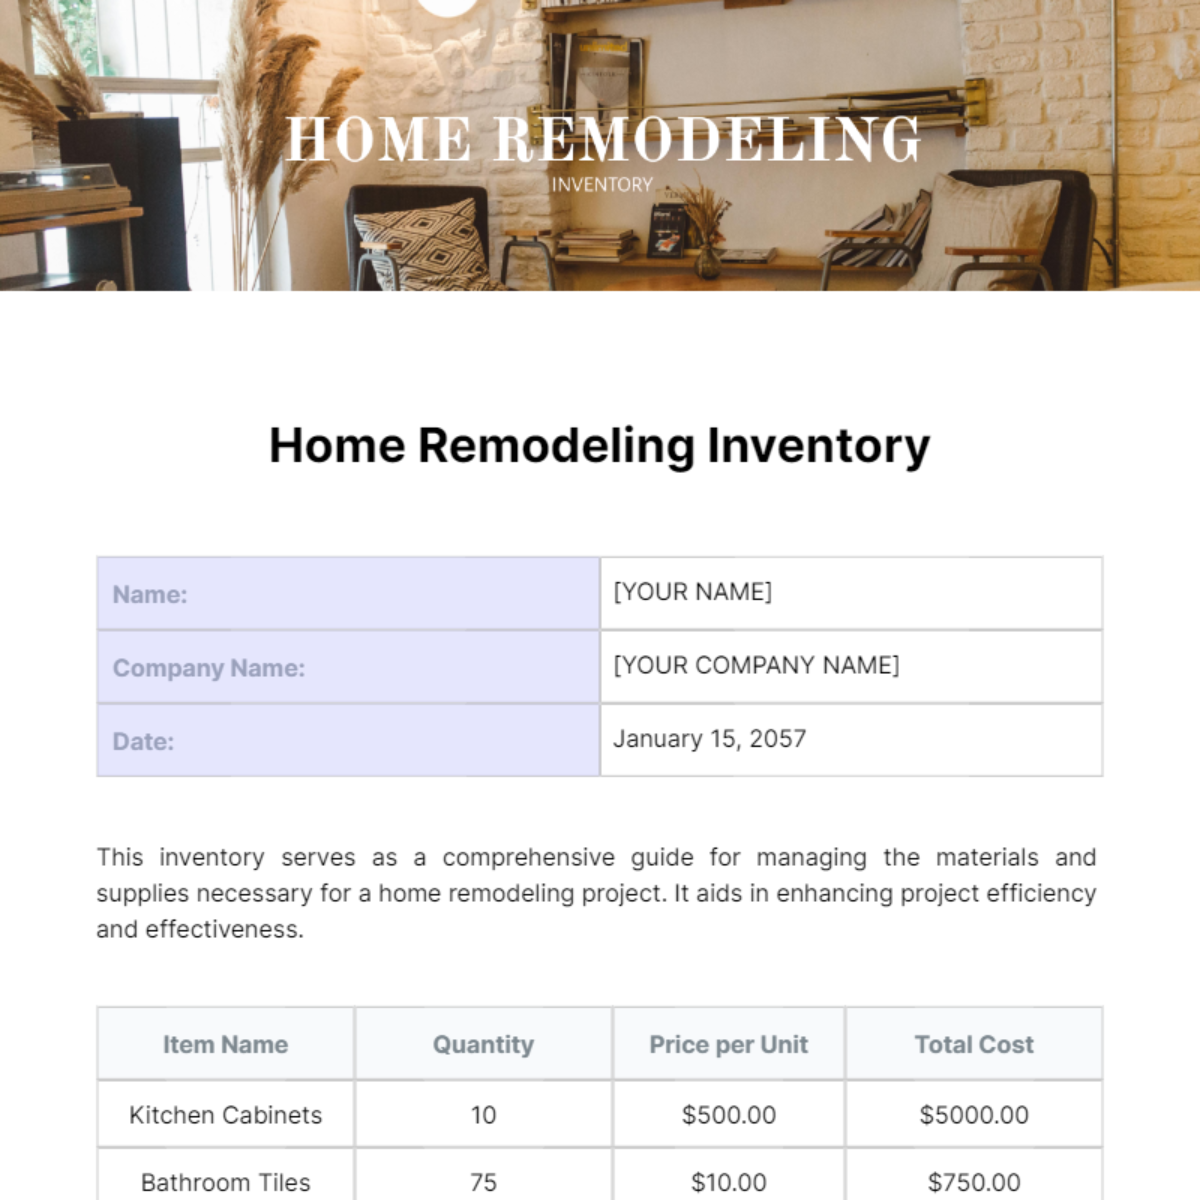 Home Remodeling Inventory Template